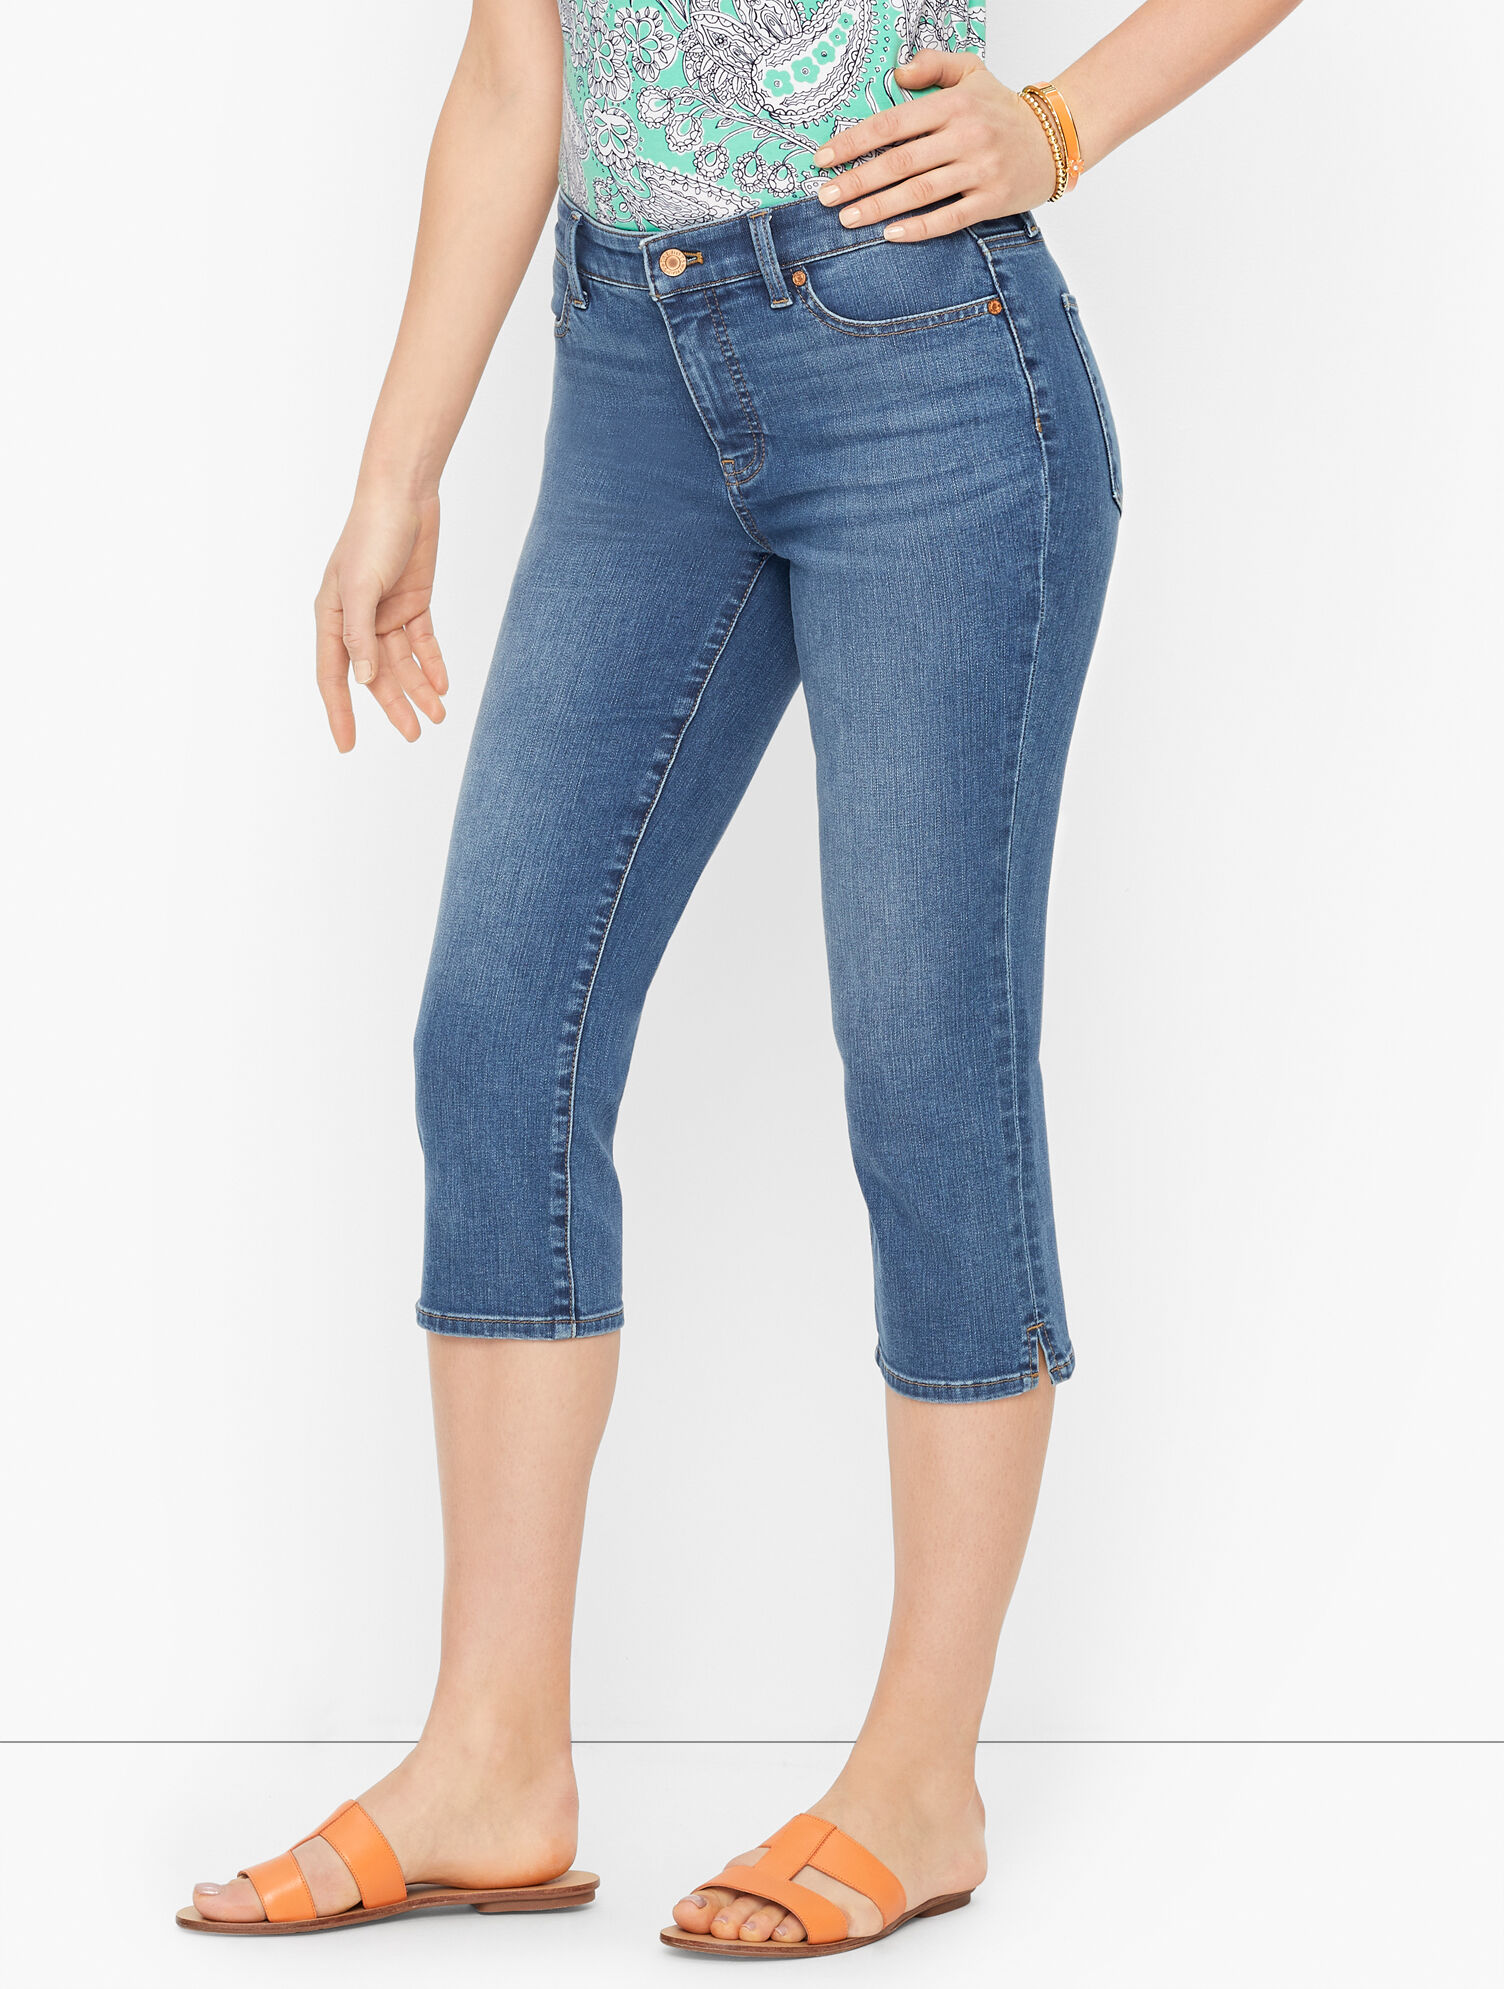 Pedal Pusher Jeans - Barrier Wash - Curvy Fit | Talbots